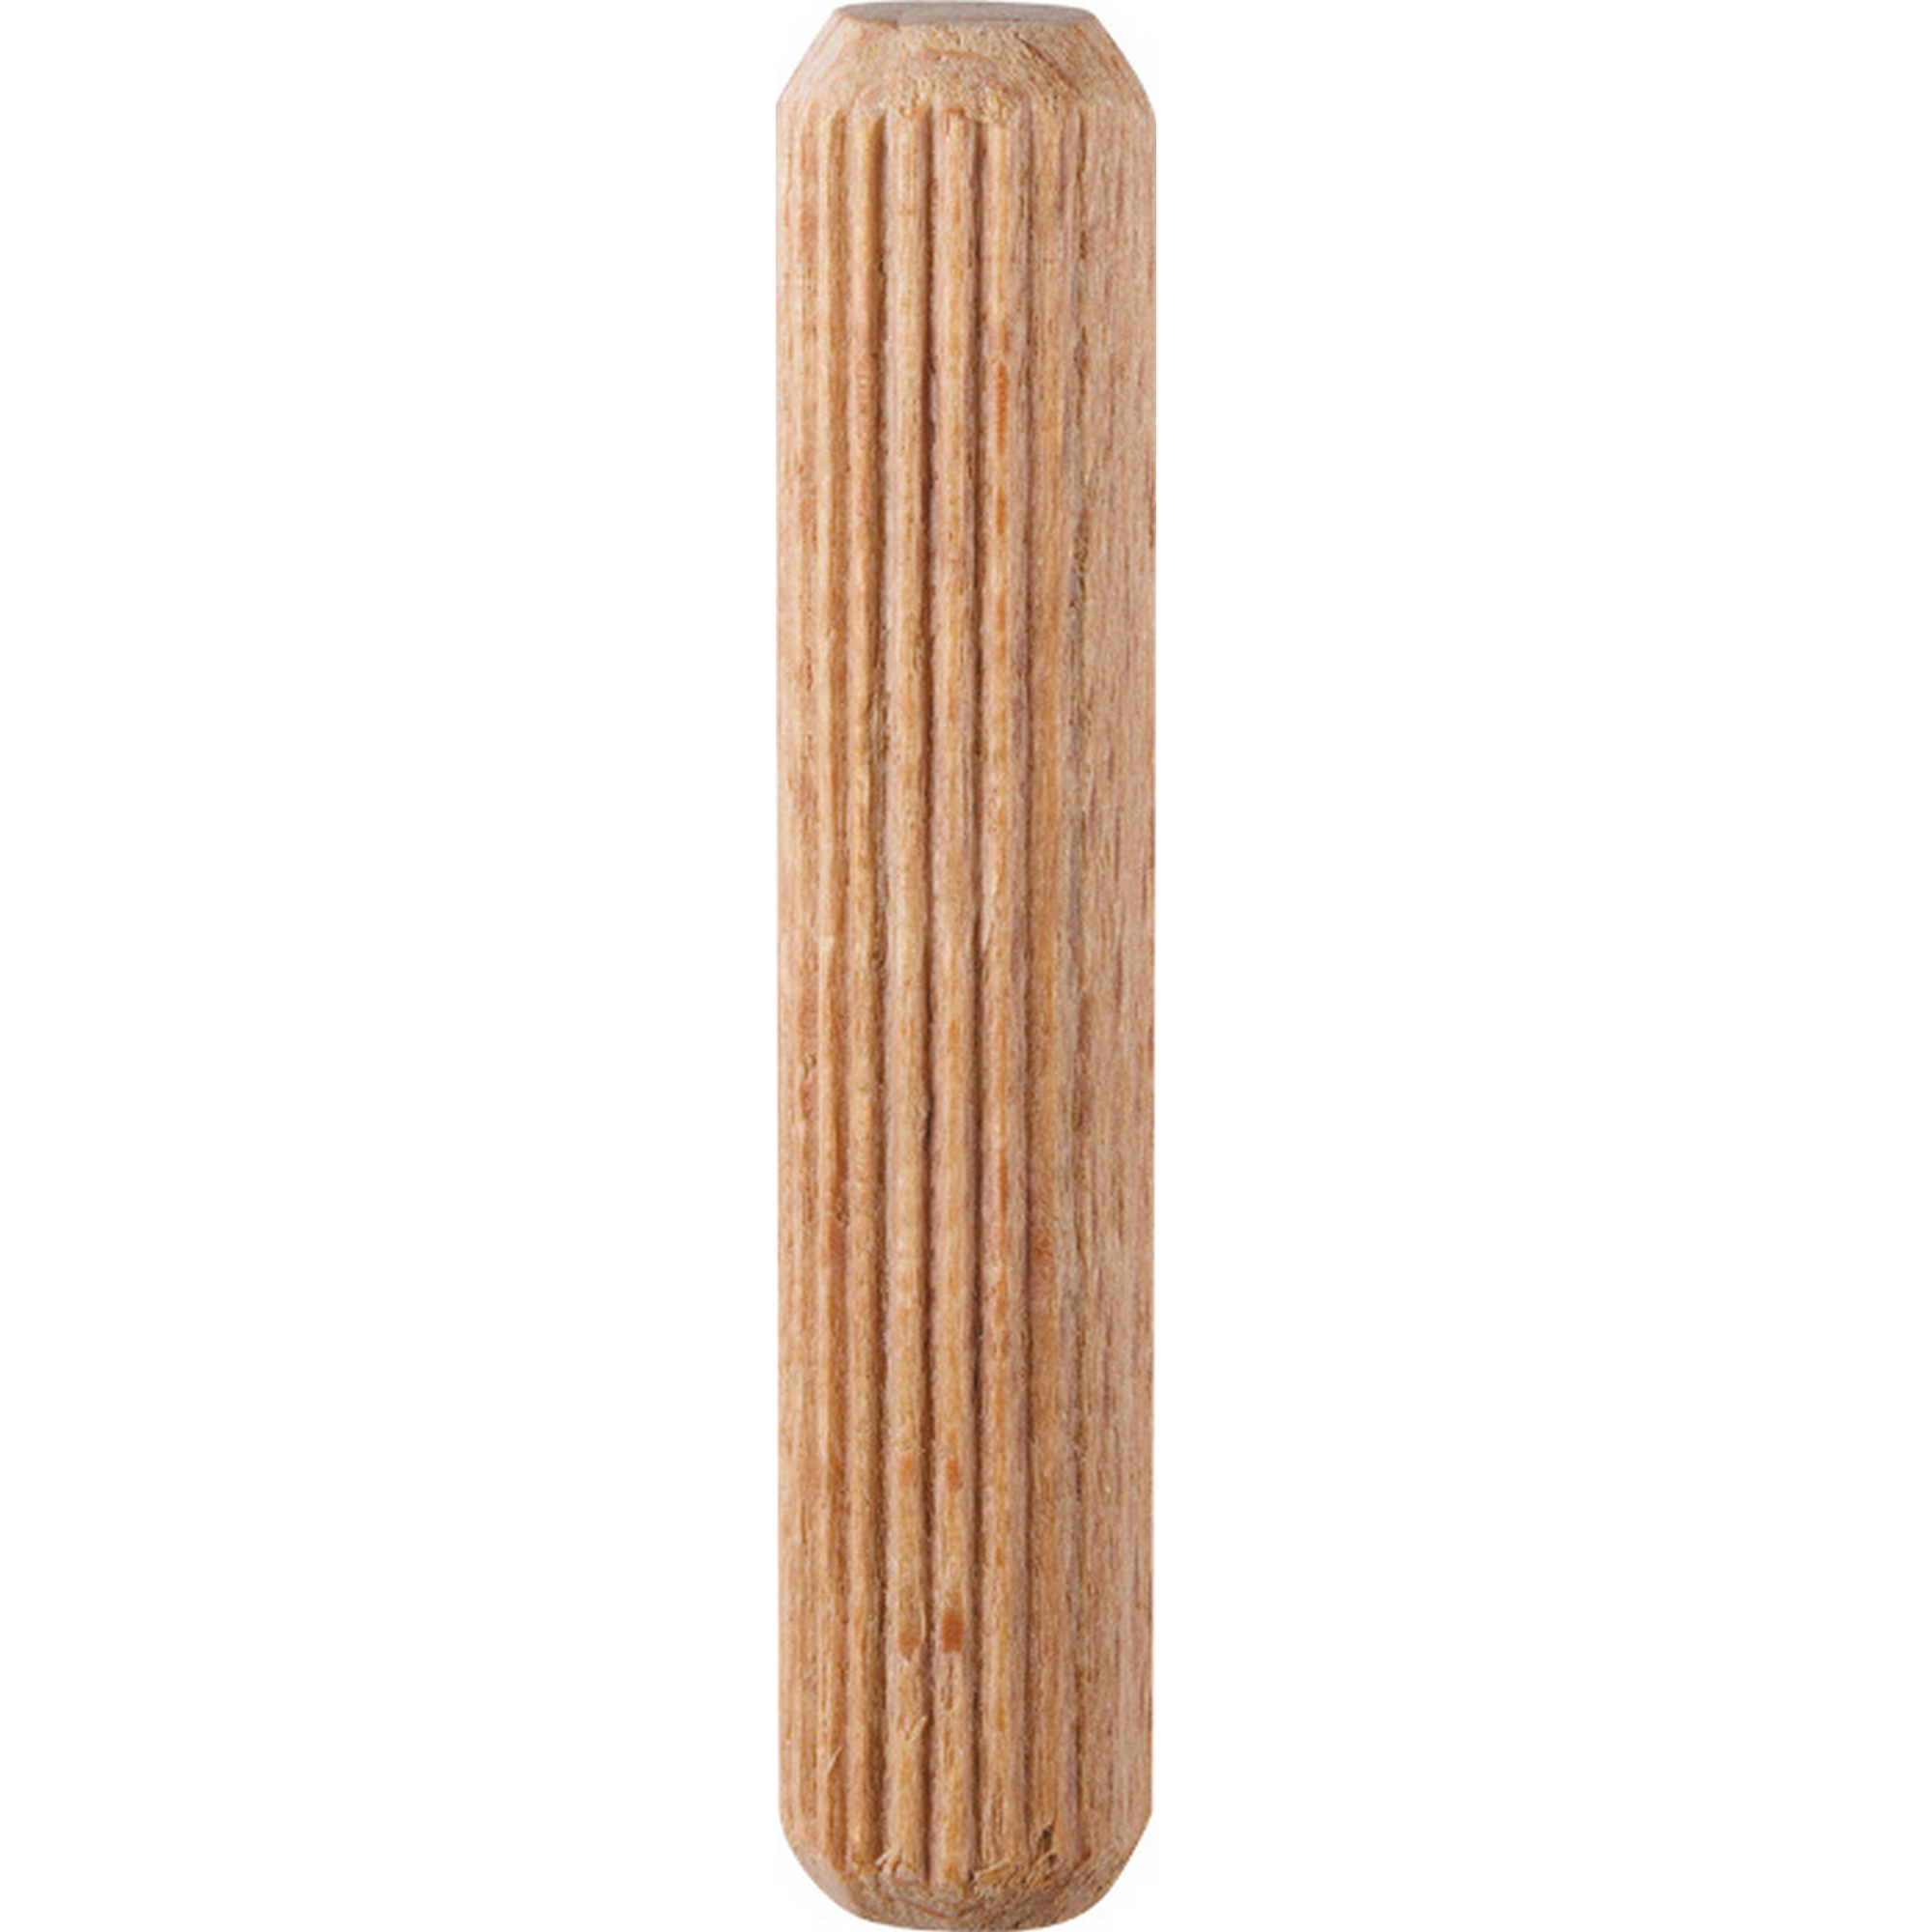 Holzdübel 10 x 40 mm 120 Stück + product picture